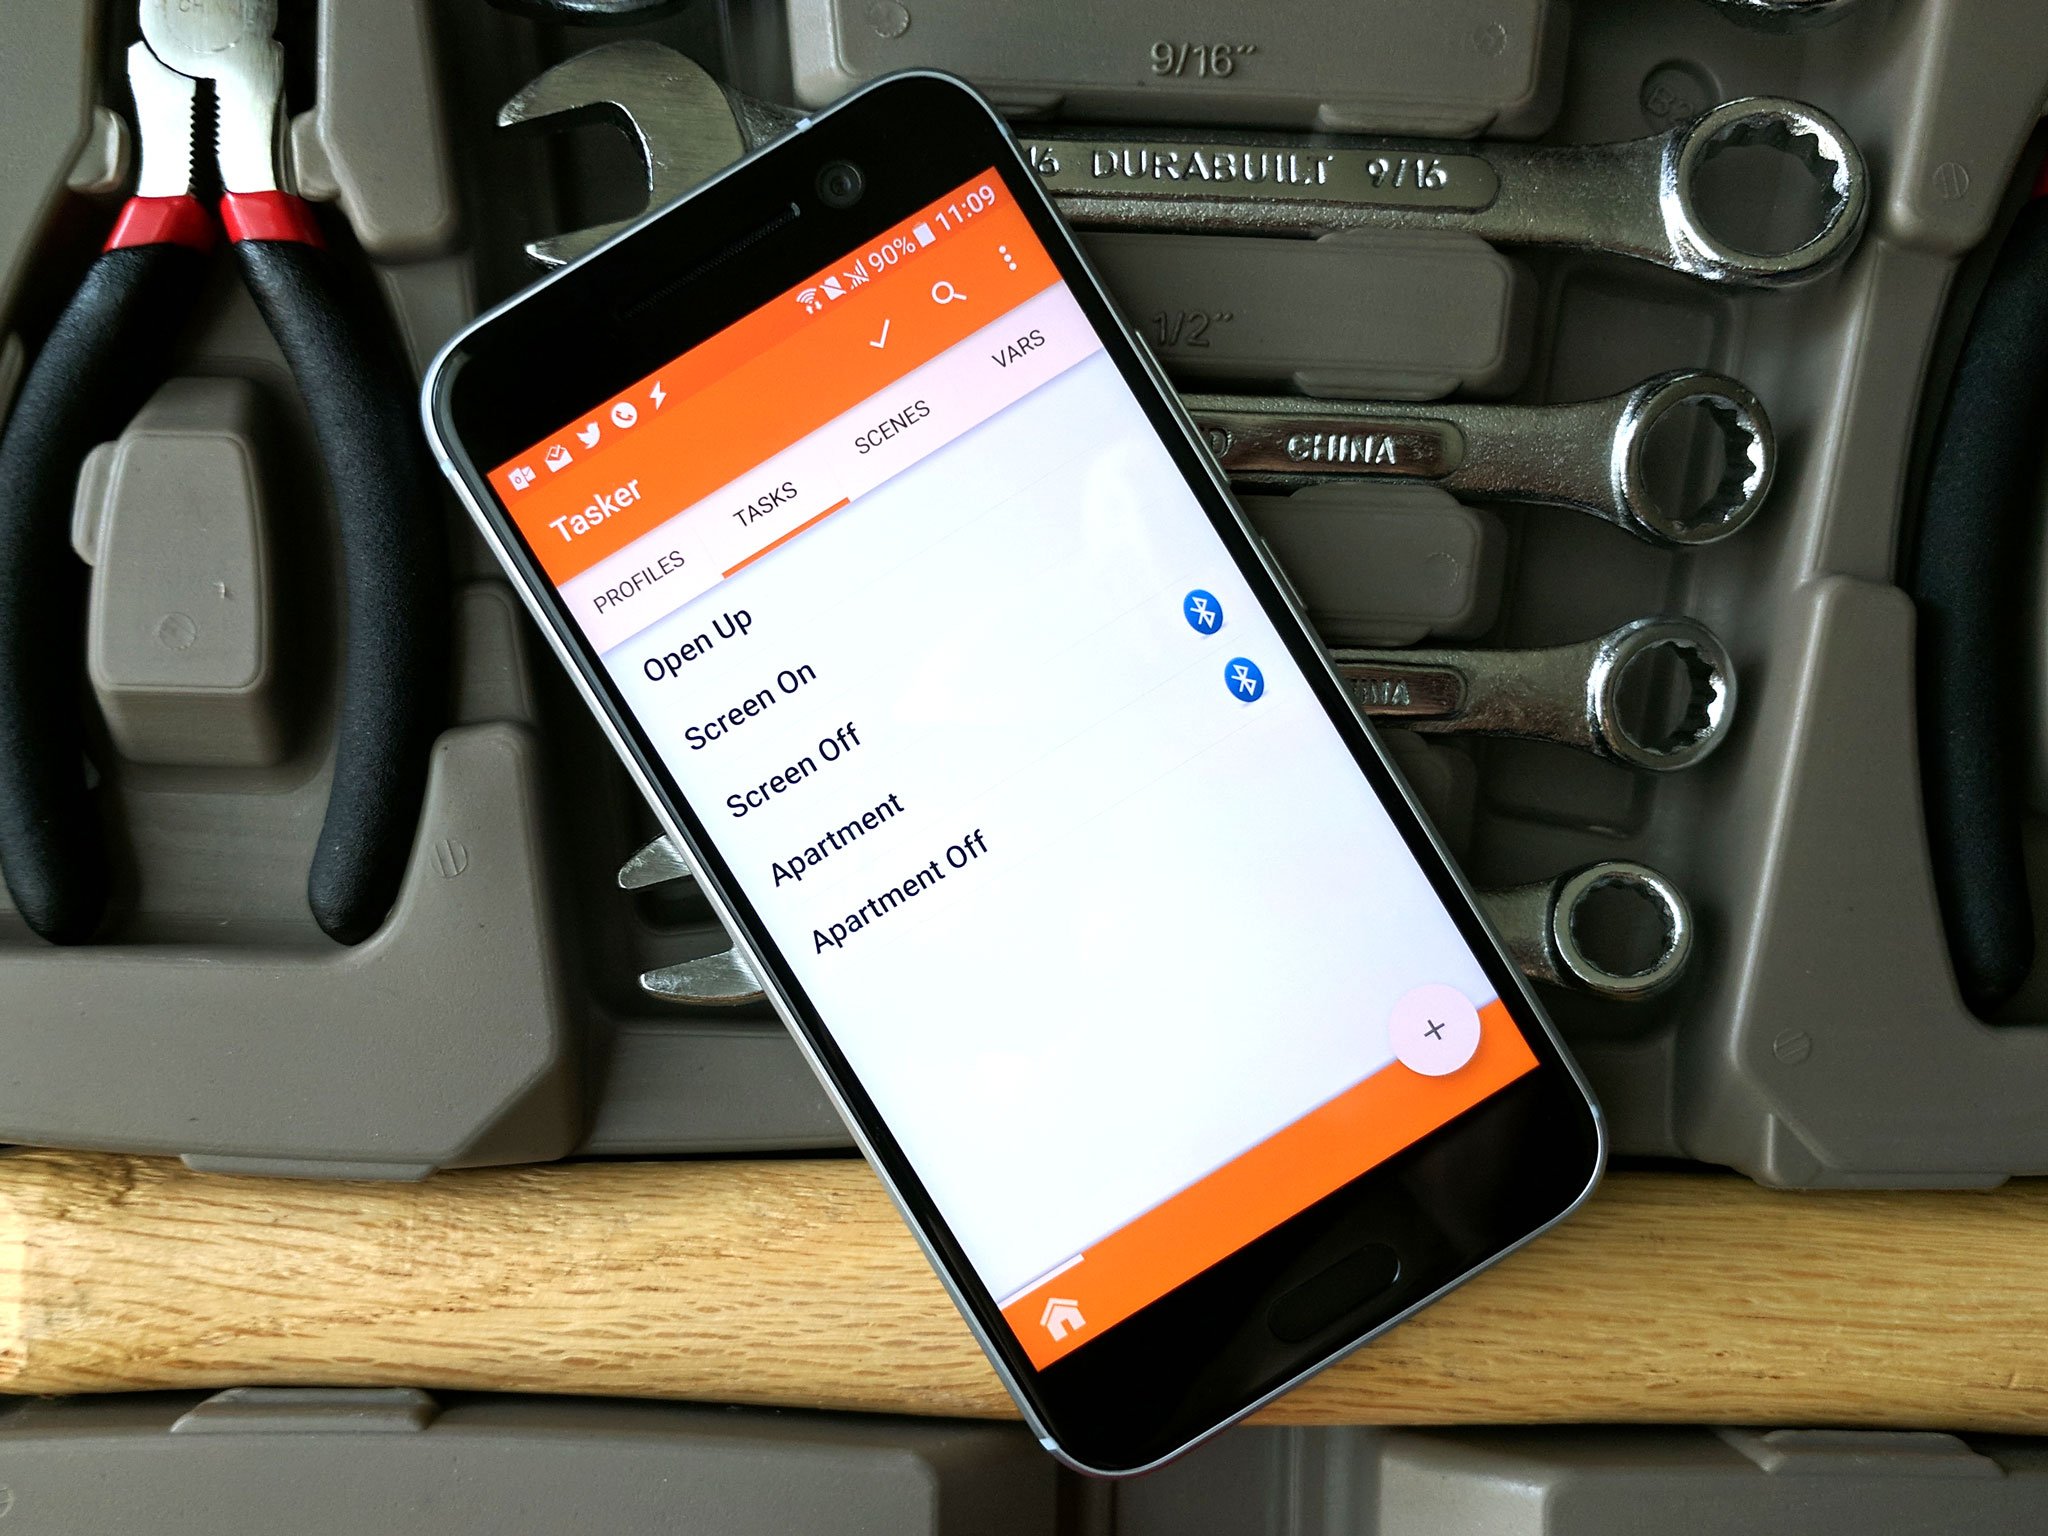 What Tasker and how does work? Android Central